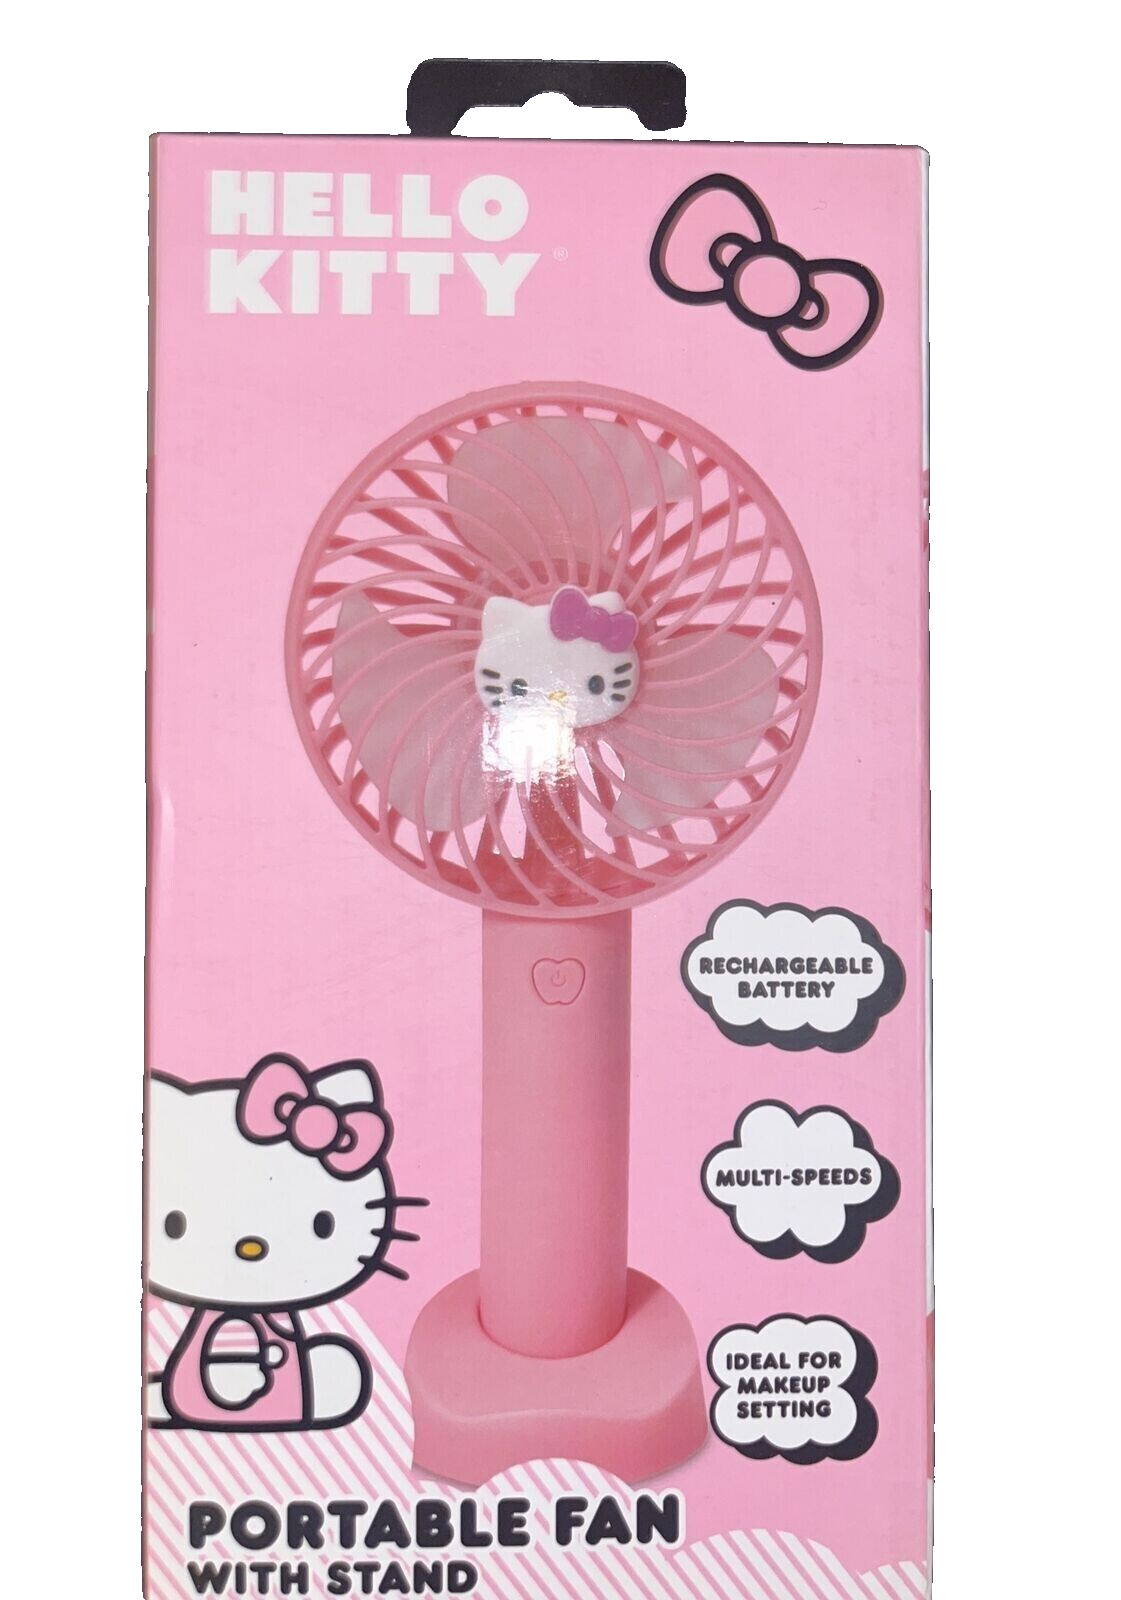 Hello Kitty Portable Fan With Stand. Hello Kitty by Sanrio